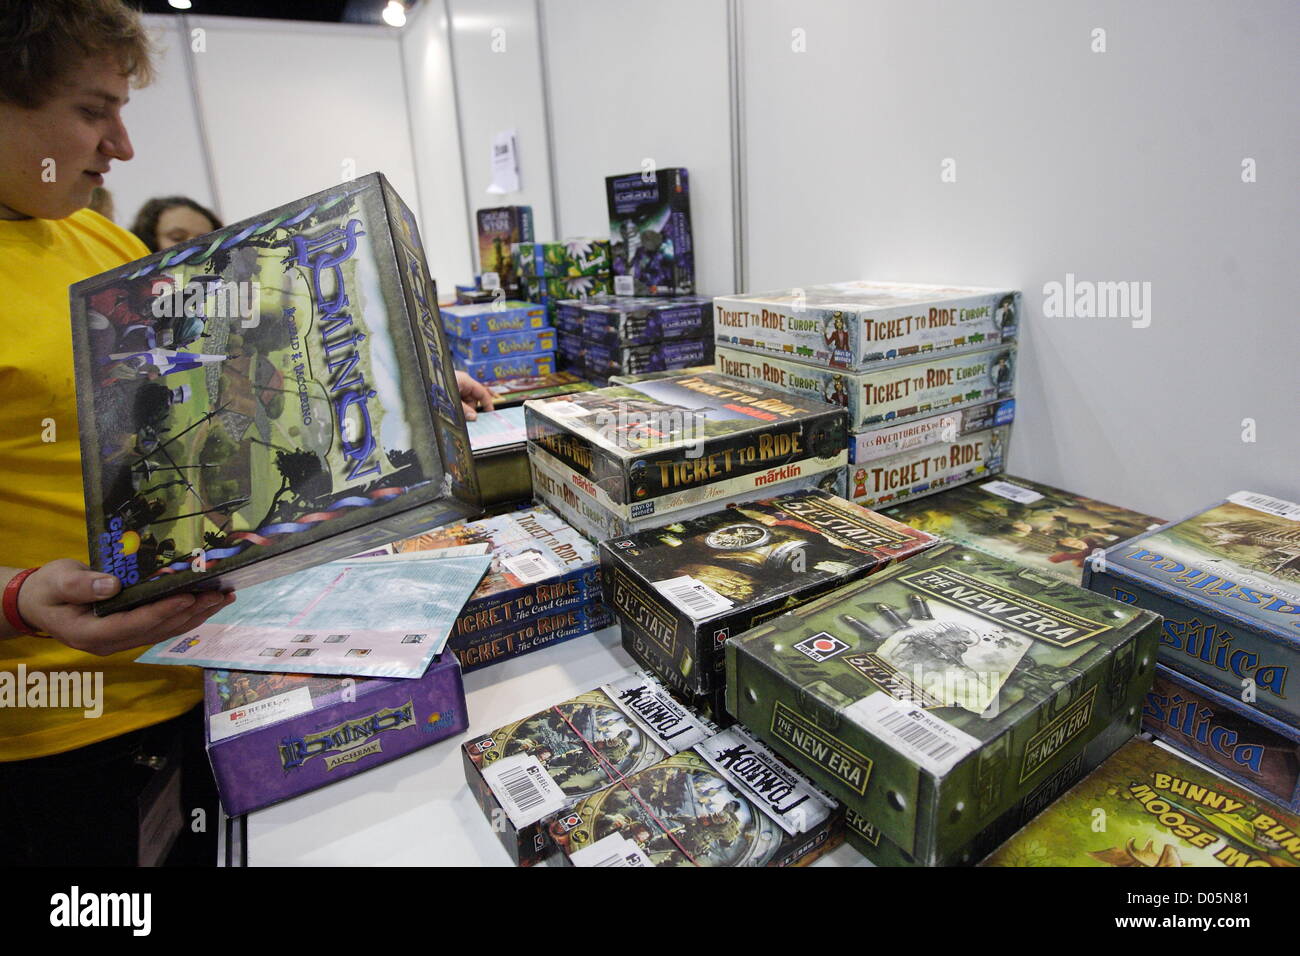 Gdansk, Poland 18th, November 2012   The Fun and Games fair. Exhibitors present board games, logical and card games, RPG games and active forms of entertainment - playgrounds, paintball etc.  This is also opportunity to buy gifts for St Nicholas Day and Christmas Stock Photo